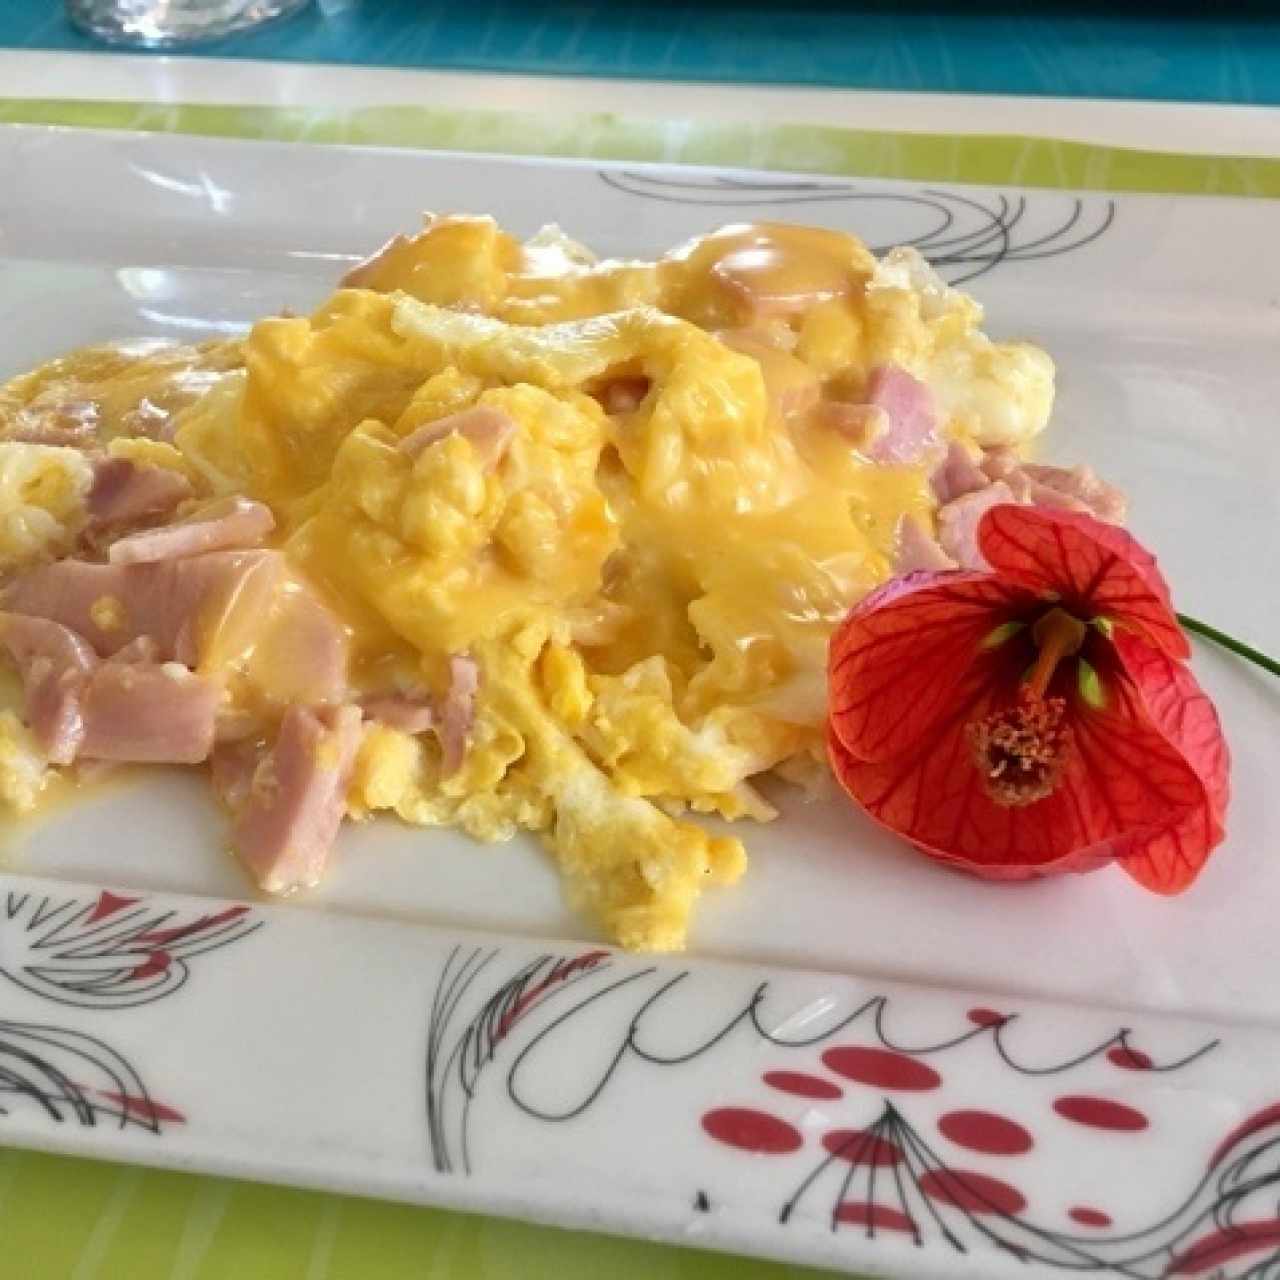 Omelette con jamón y queso